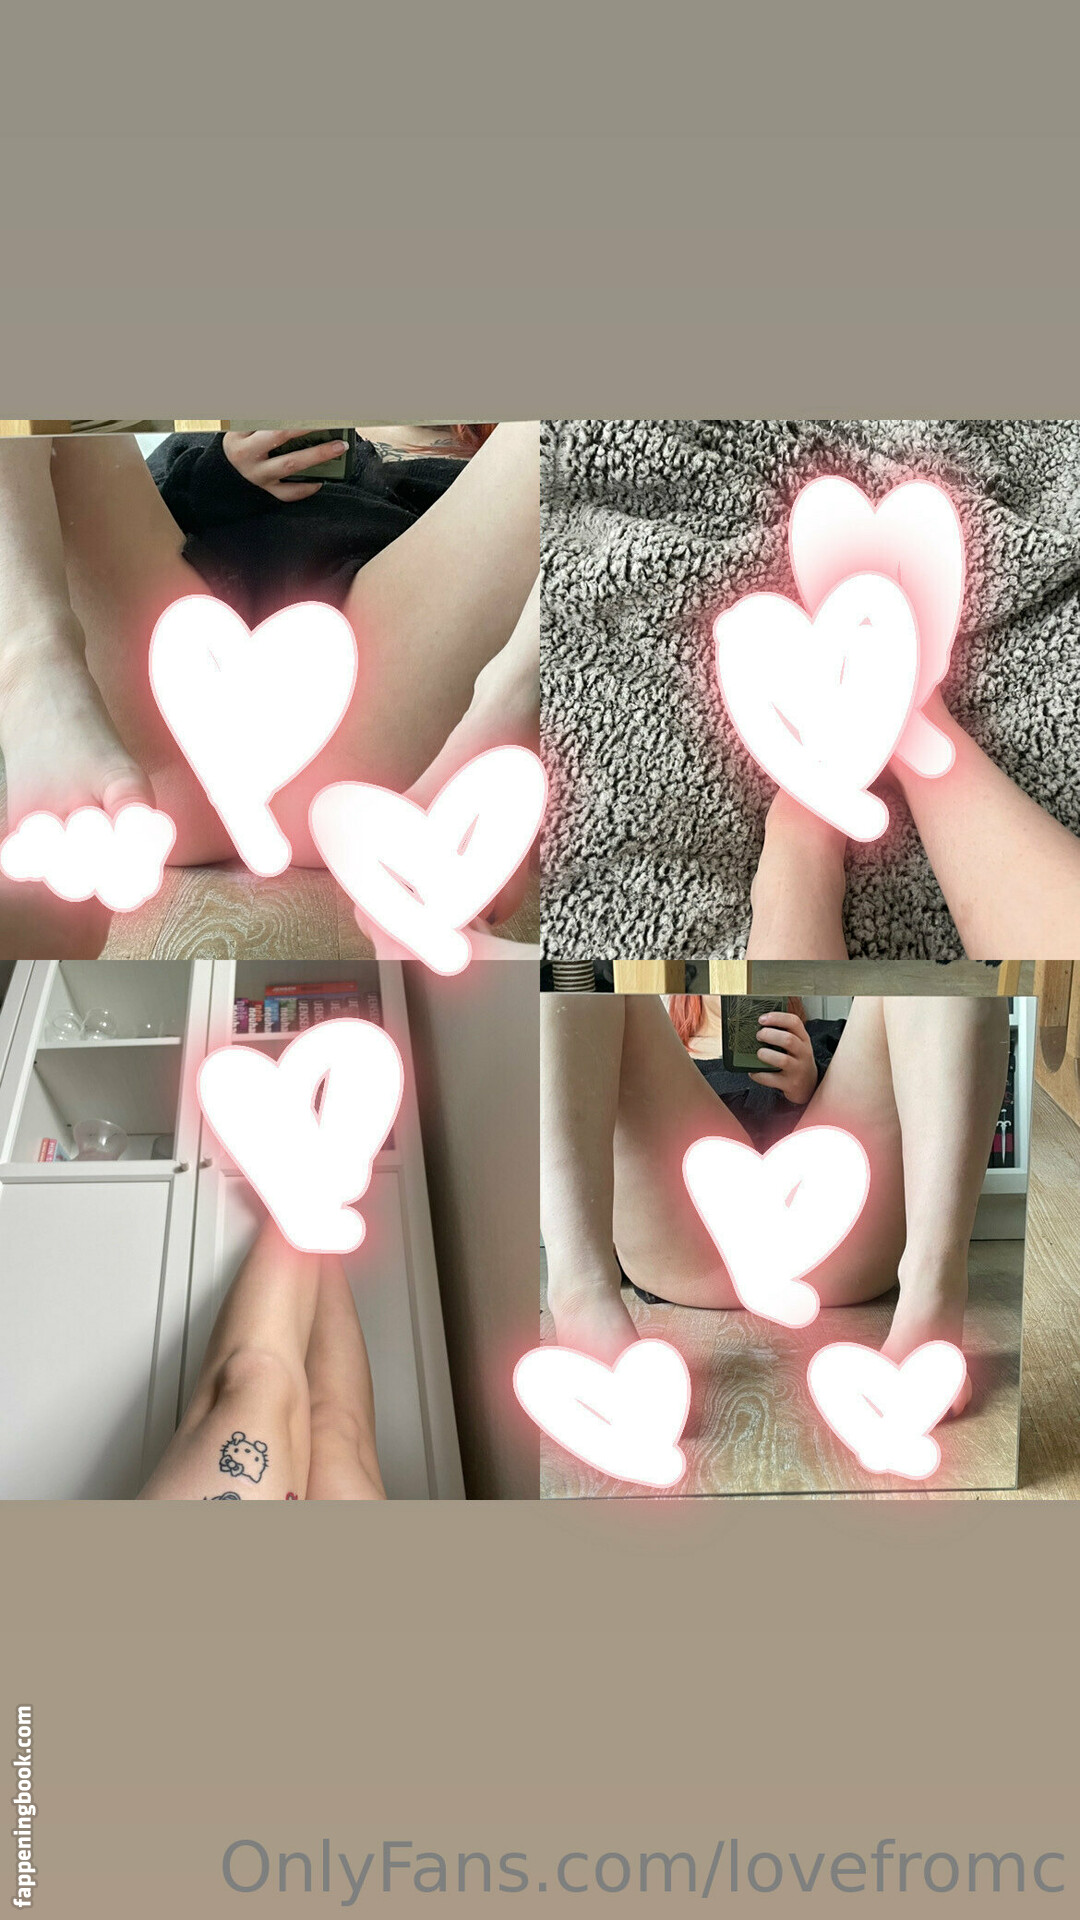 lovefromc Nude OnlyFans Leaks